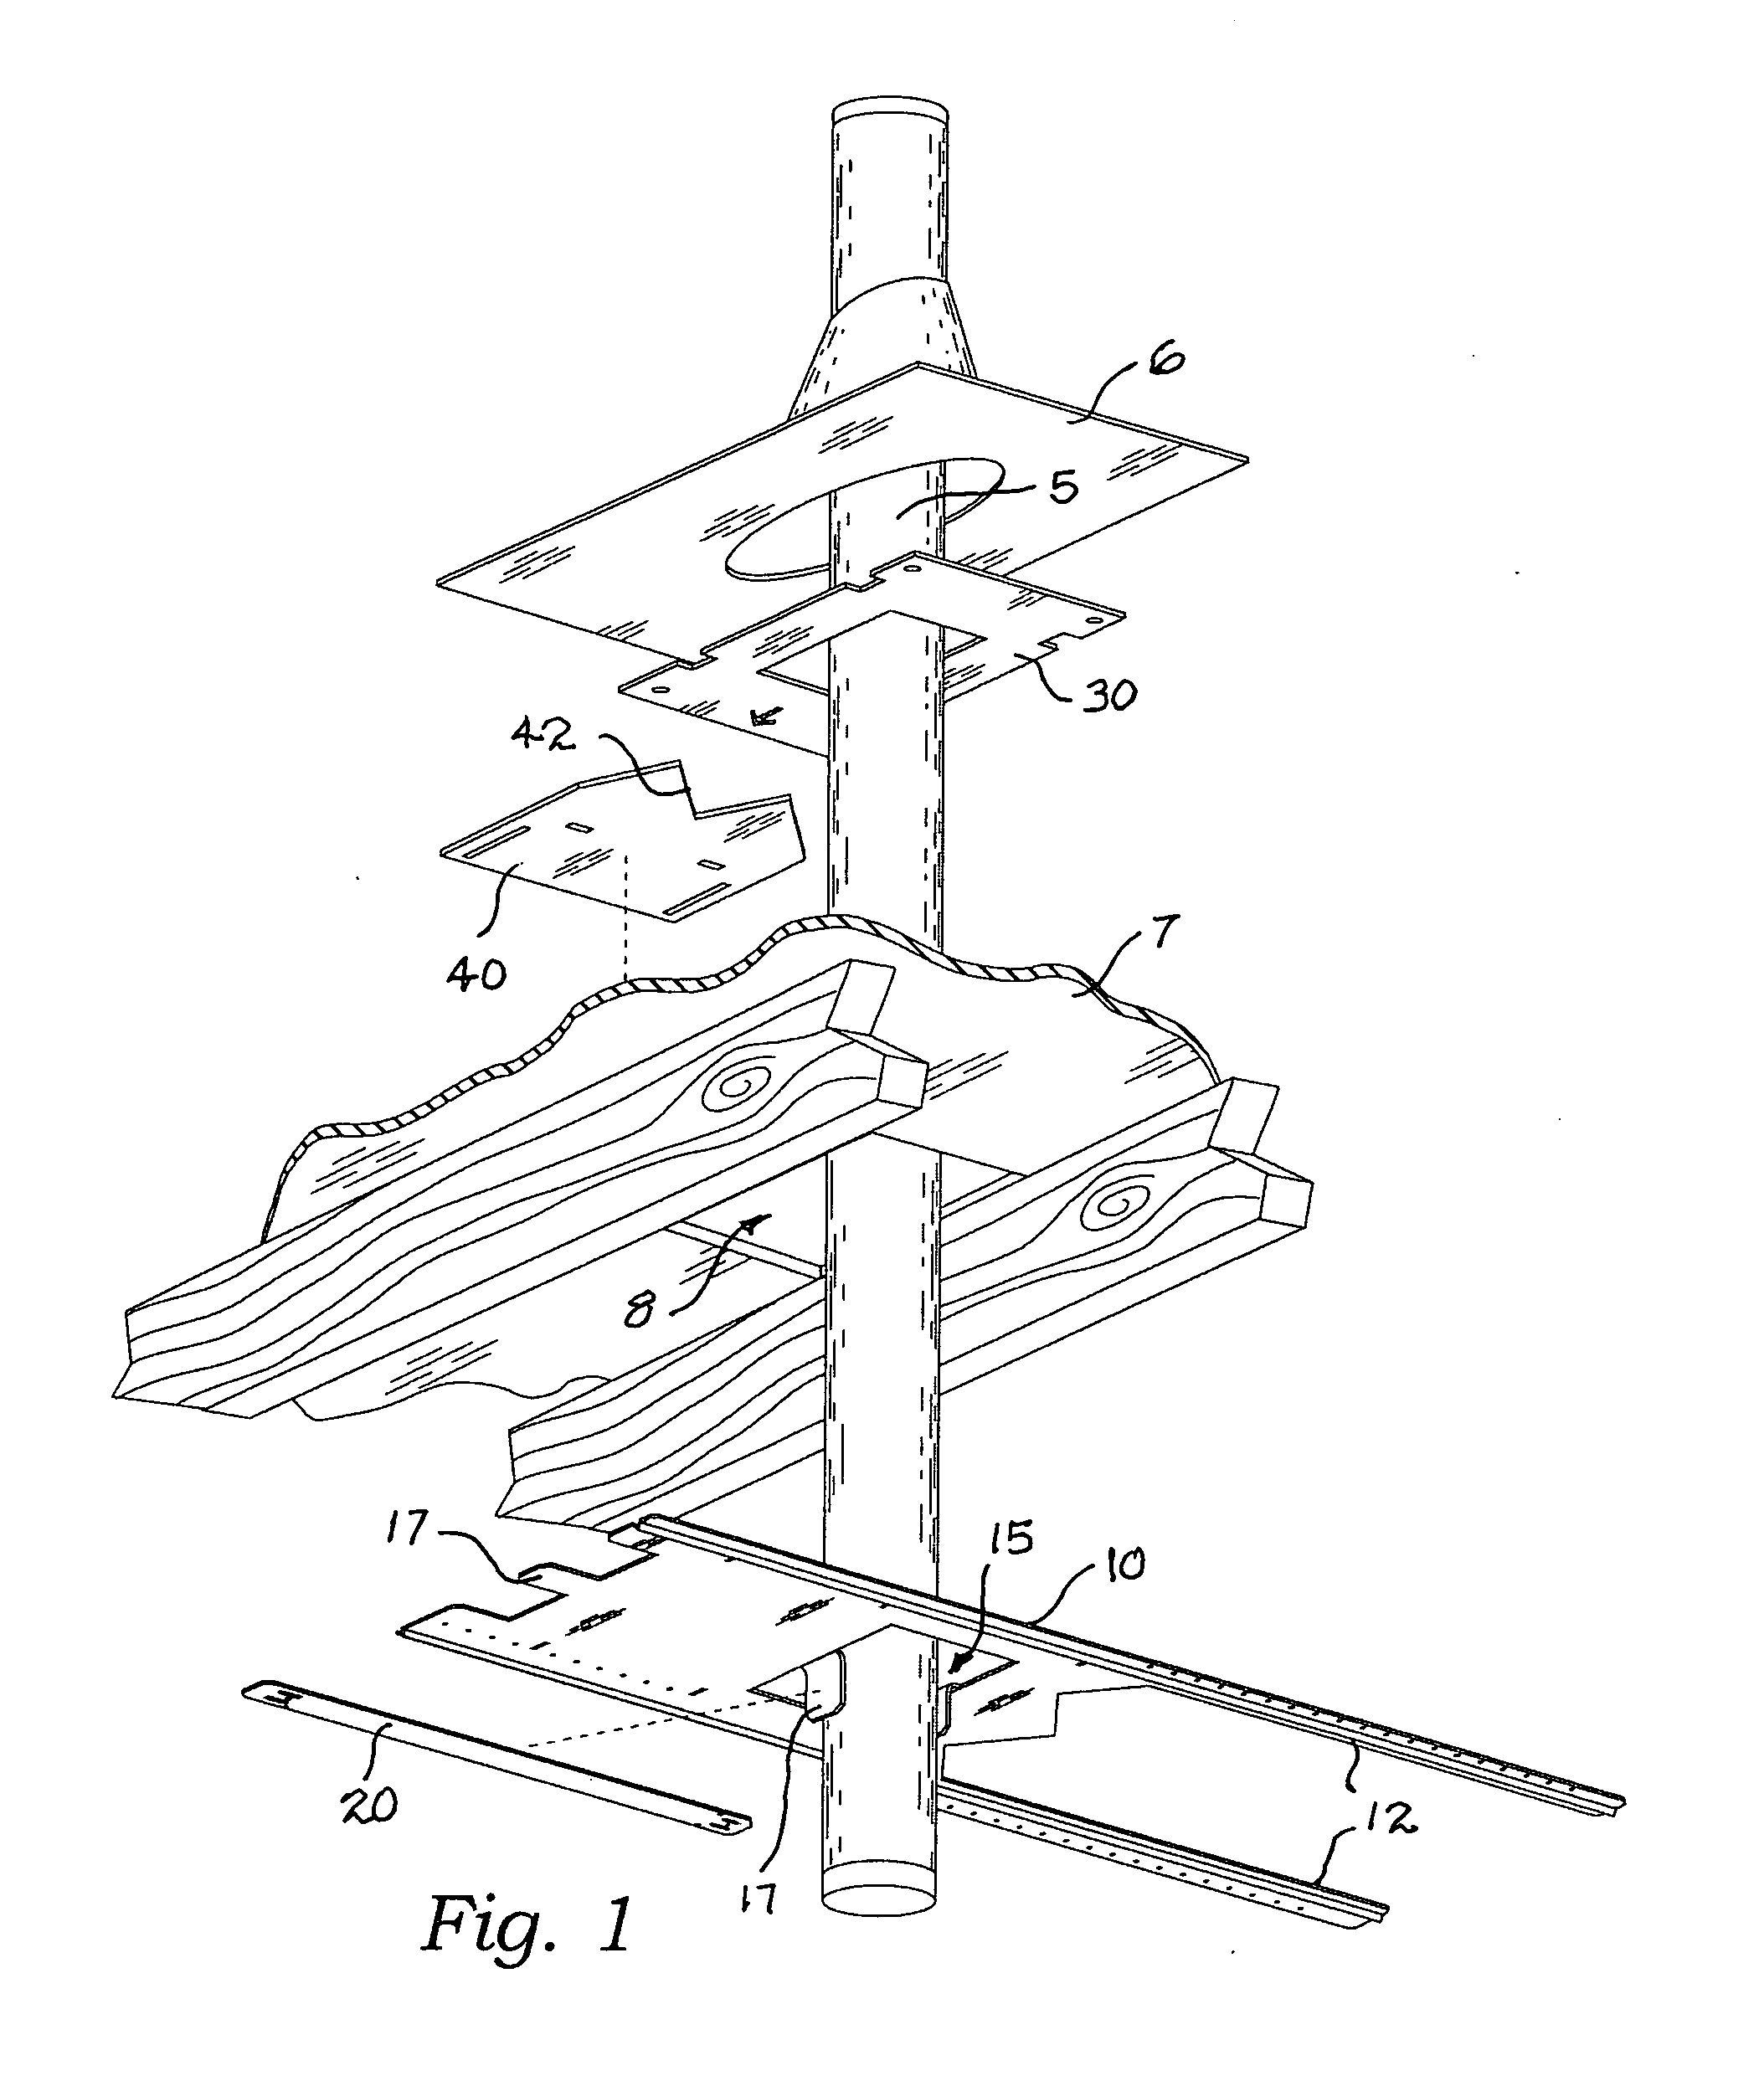 Break-apart assembly for supporting an exhaust flue